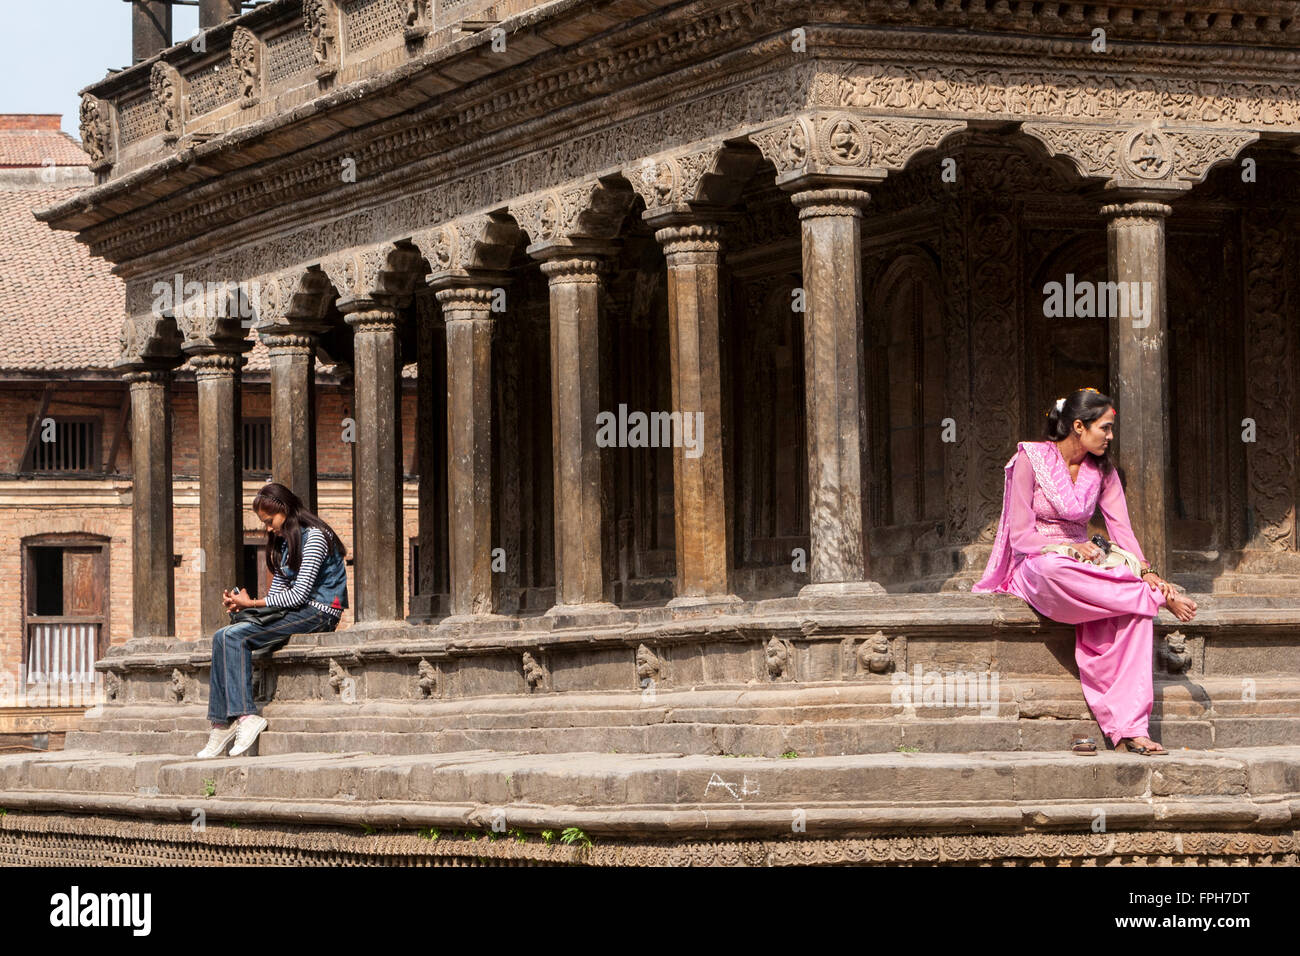 Nepal, Patan.  Two Young Nepalese Women, one in Western Clothing, one in Traditional. Stock Photo